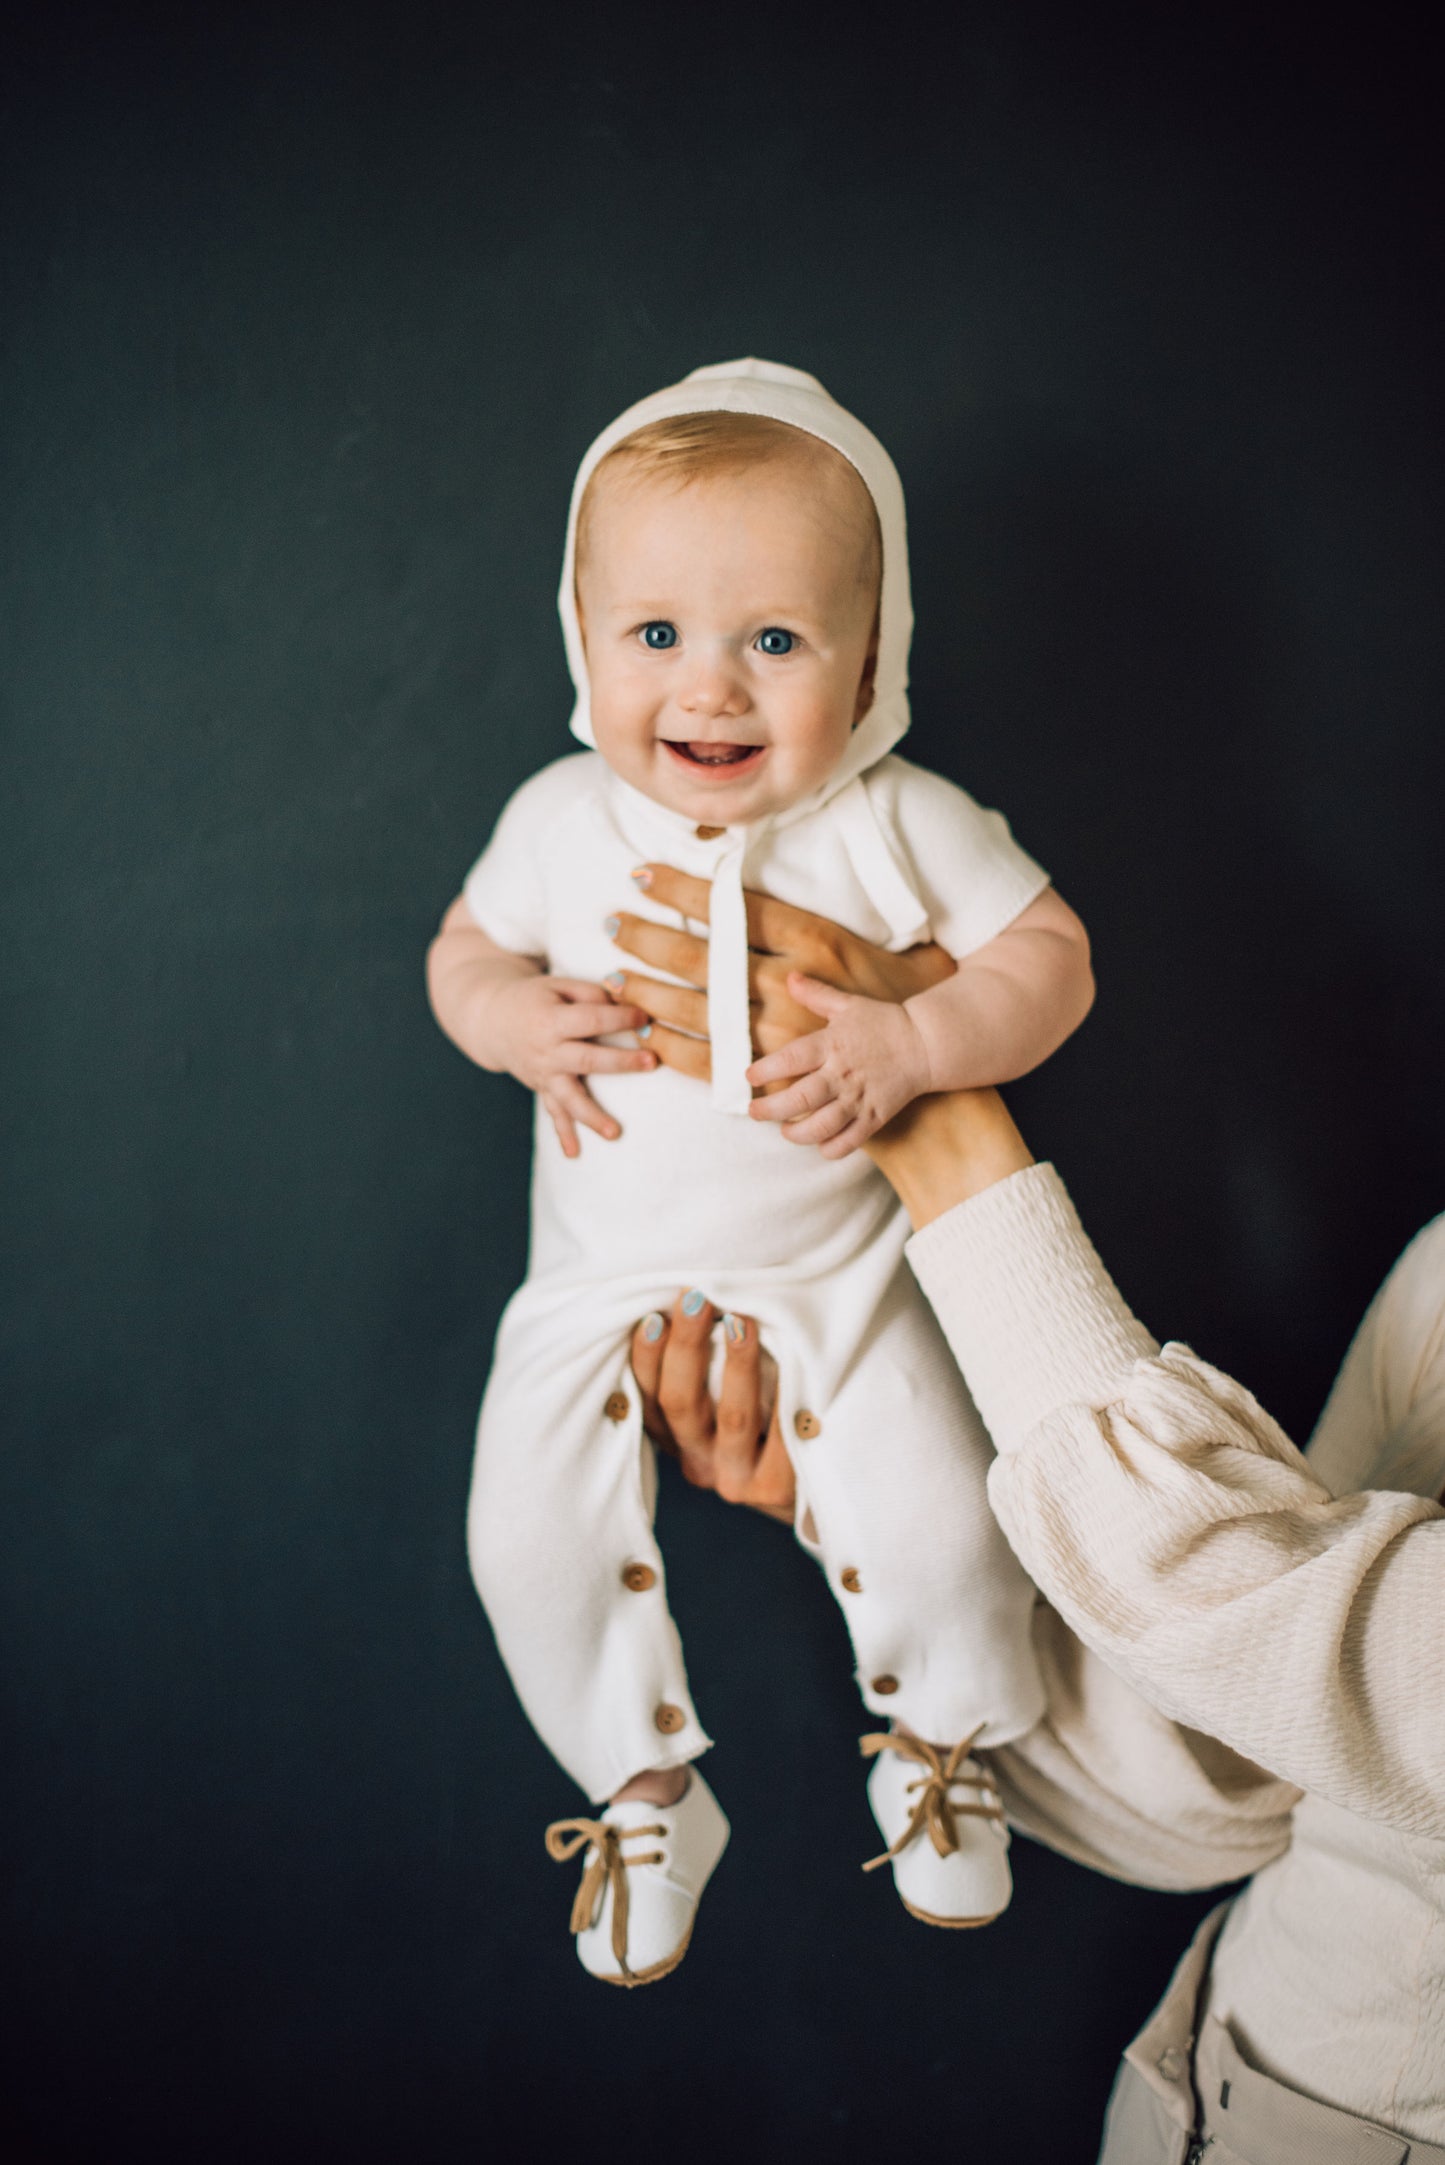 Baby boy being help up in white onesie, white bonnet, and white shoes with brown laces.